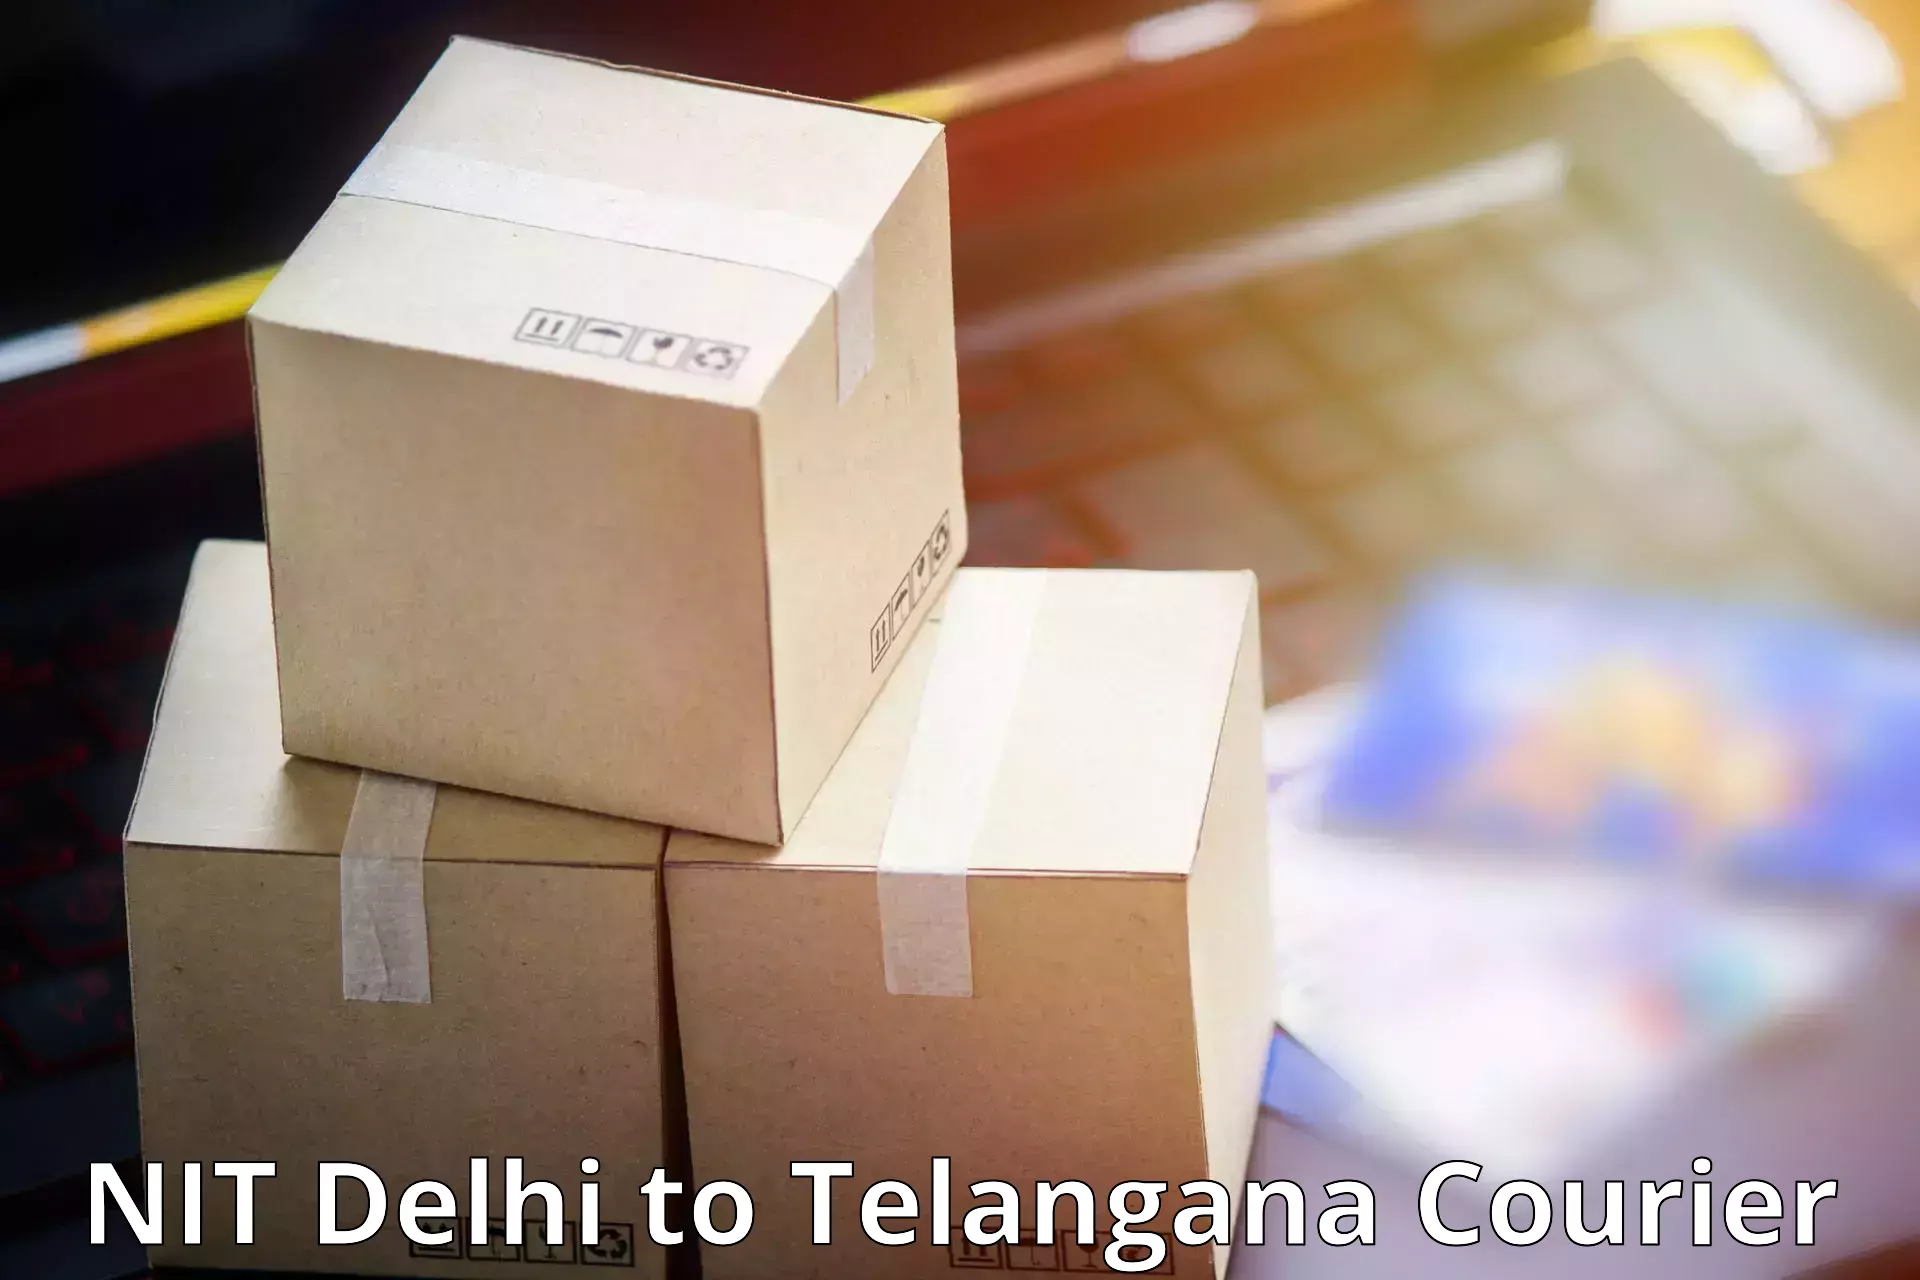 Courier insurance NIT Delhi to Amangal